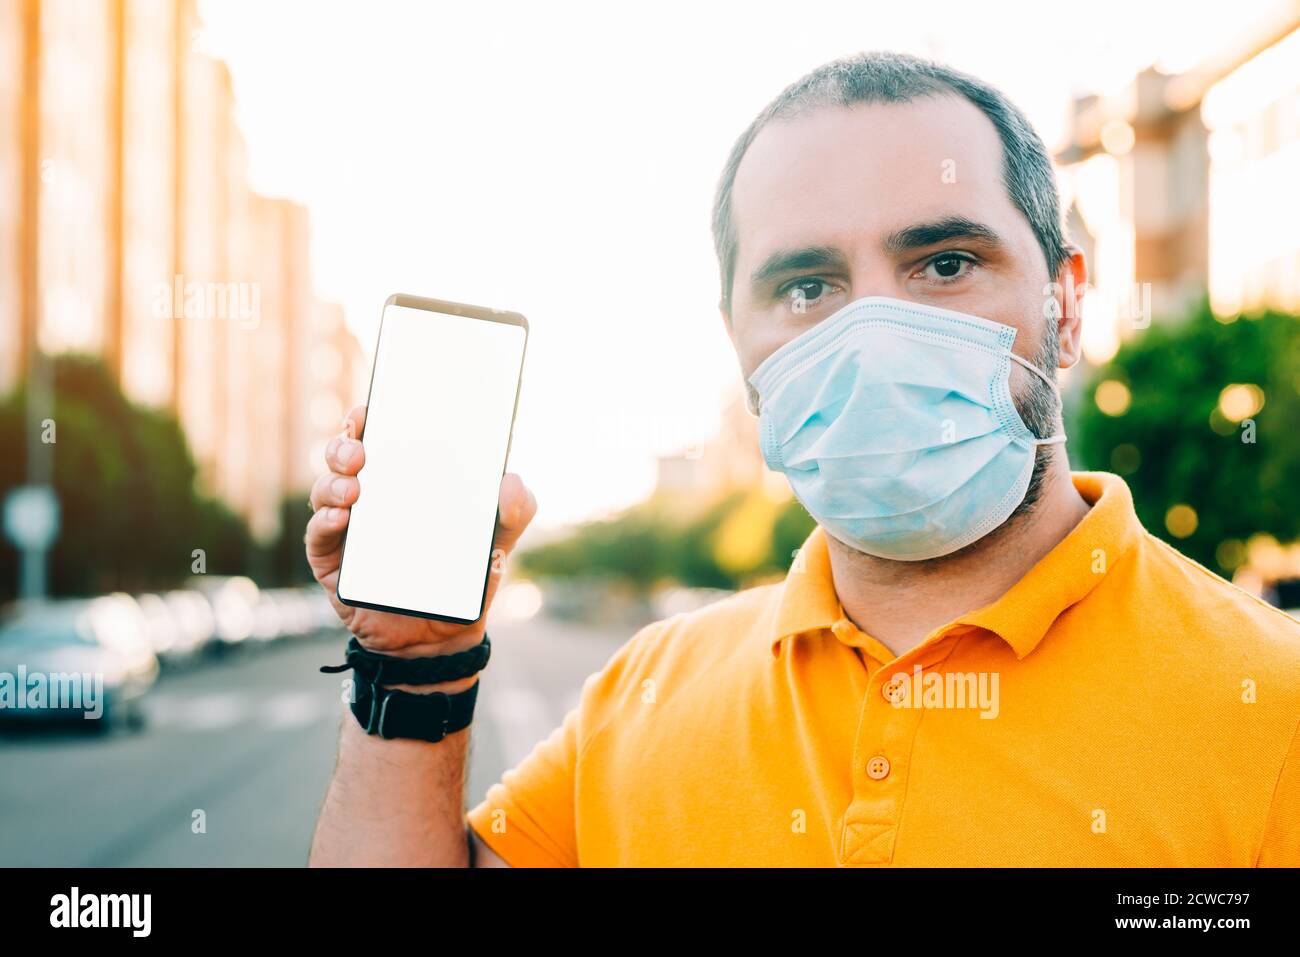 Portrait of 40s aged man with surgical medical mask standing, holding and showing smart phone display. Stock Photo